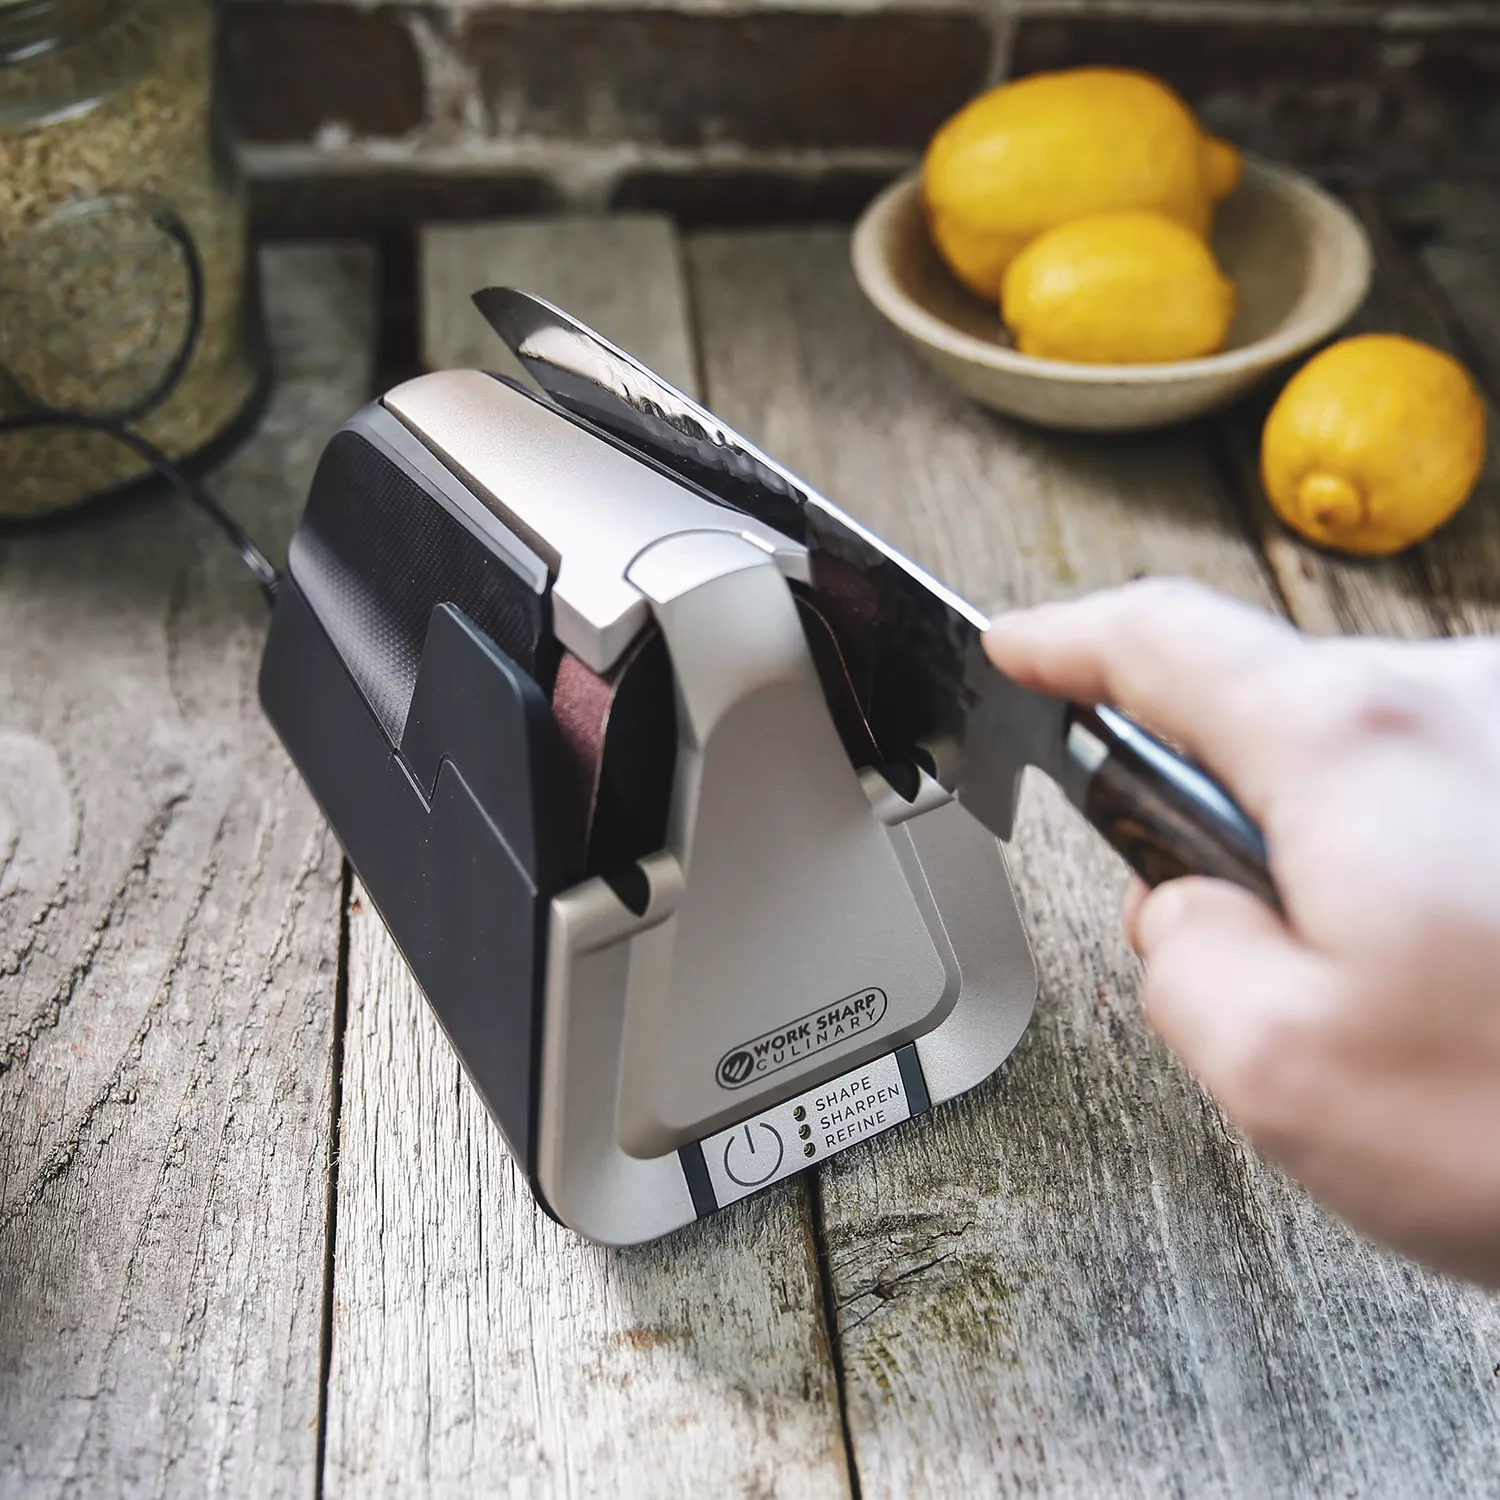 Work Sharp Culinary E5 Kitchen Knife Sharpener Review: Excellent